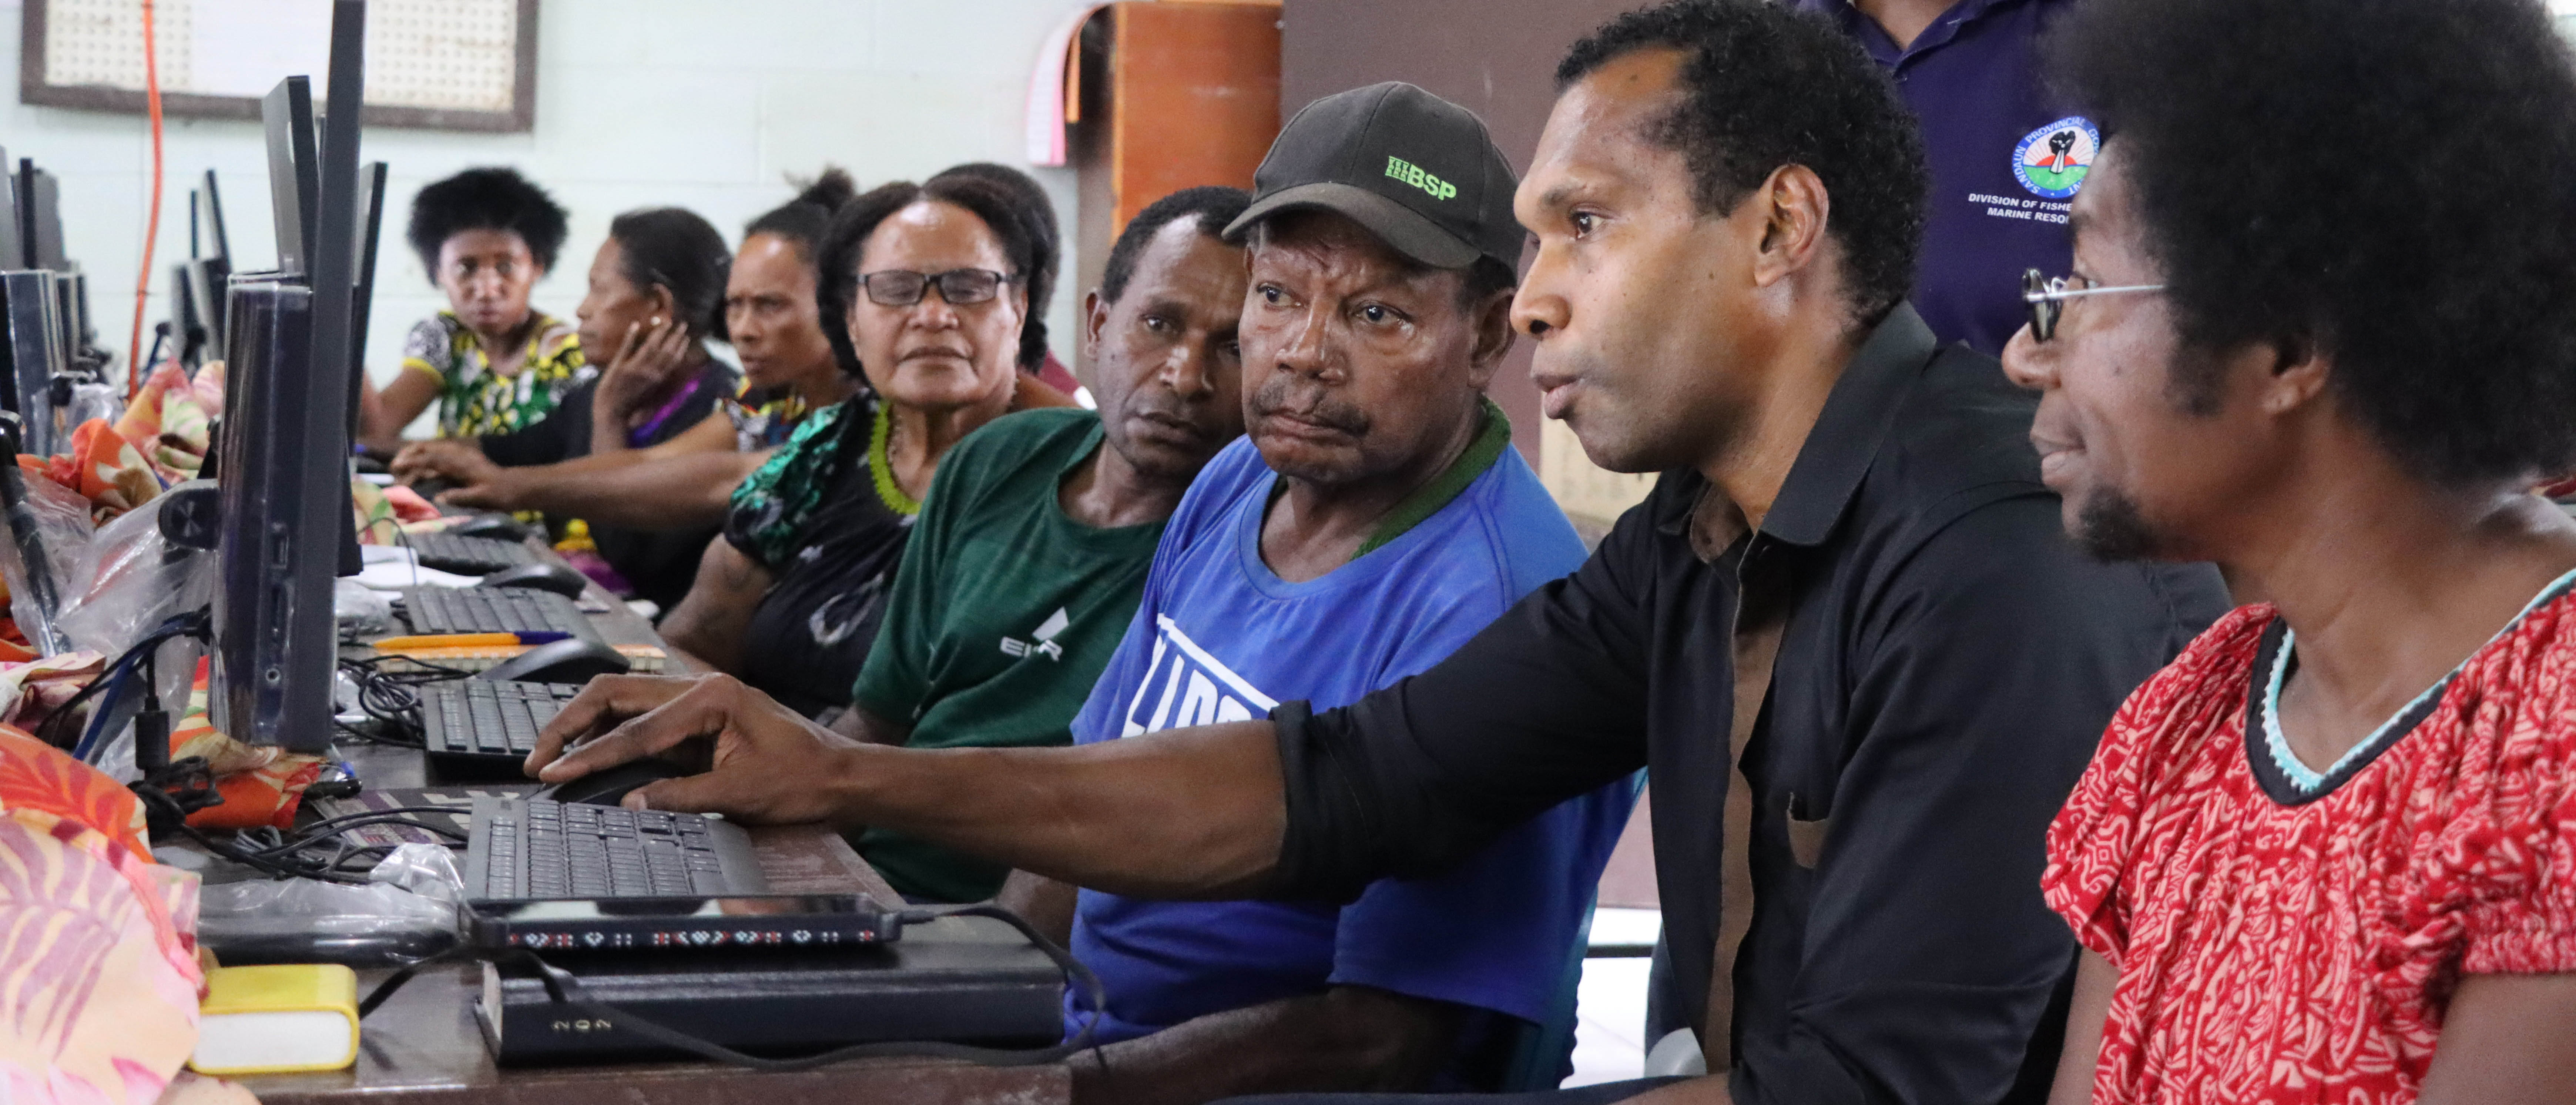 Participants practise taught digital skills during the training workshop organised by ITU under the EU-STREIT PNG Programme in Vanimo.